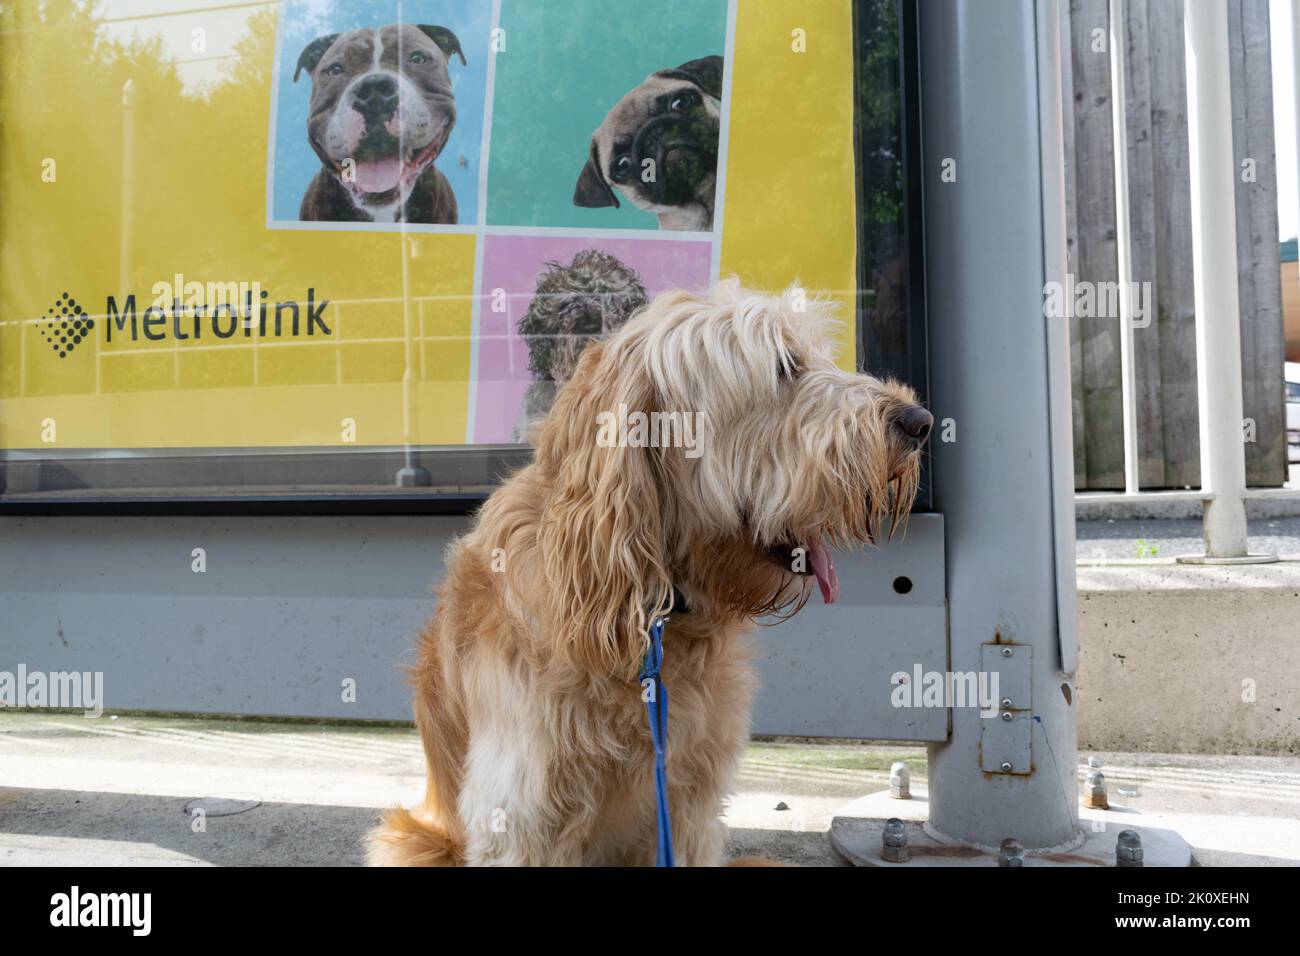 Dog sat looking with tongue out. Manchester Metrolink stop with poster advertising tram travel with dogs in background Stock Photo